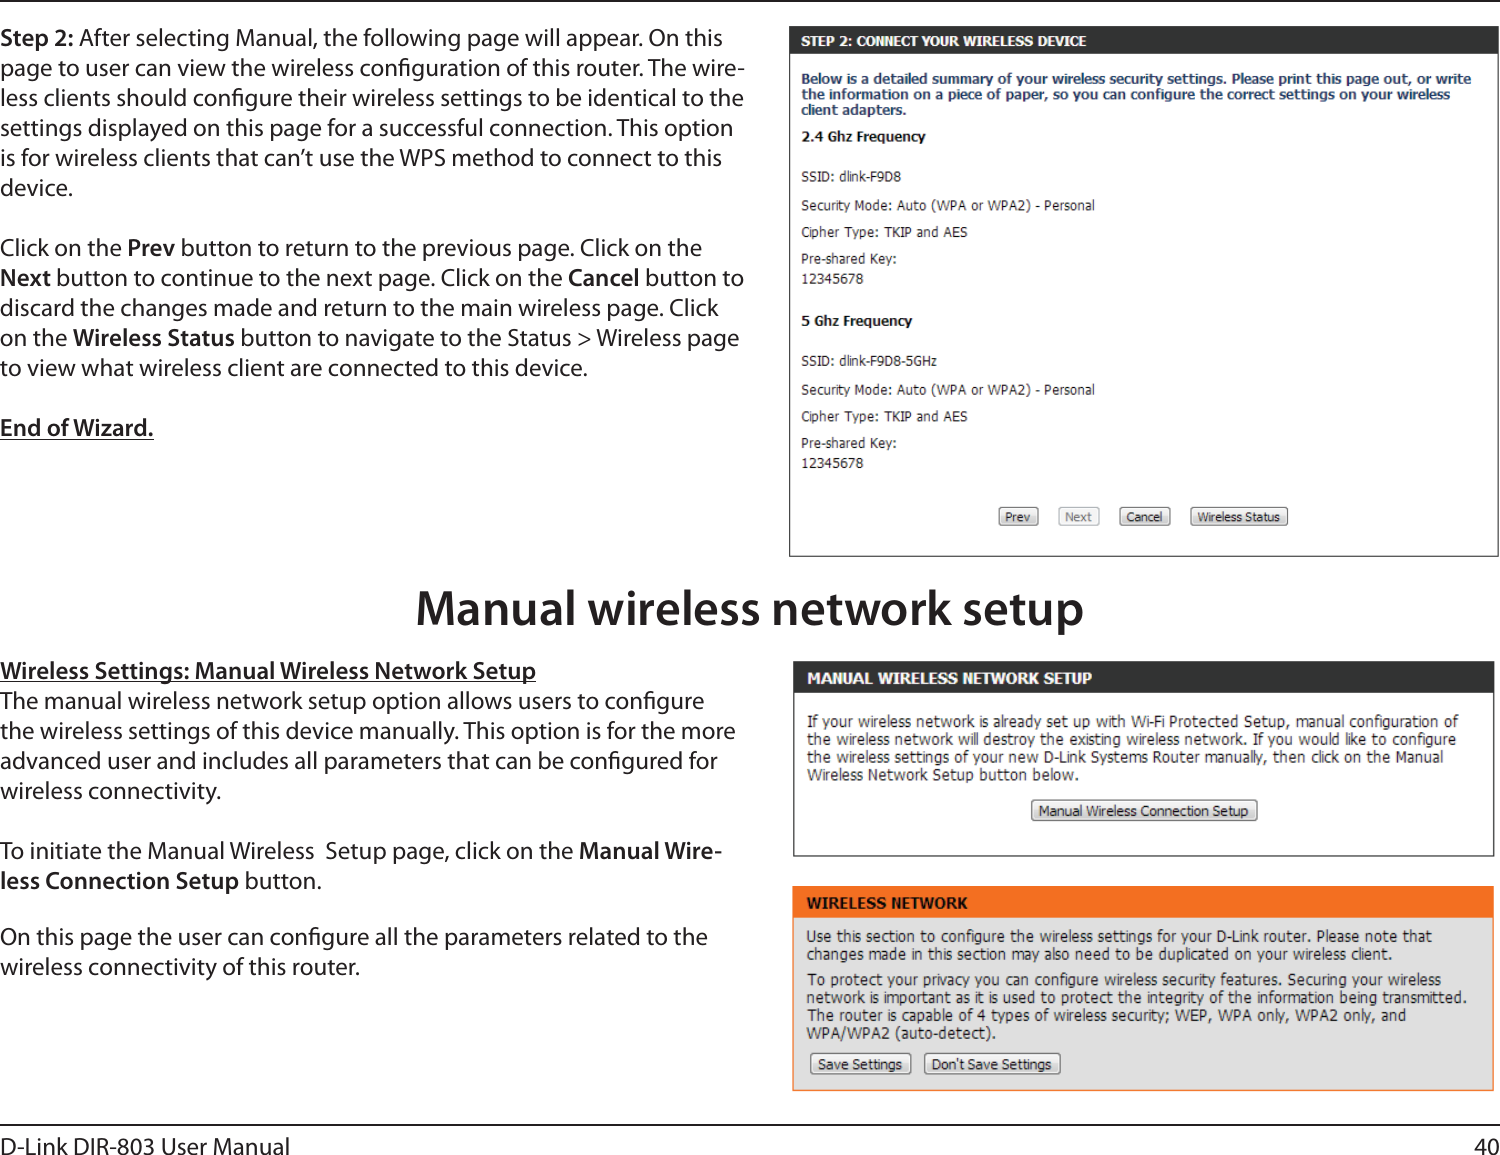 40D-Link DIR-803 User ManualStep 2: After selecting Manual, the following page will appear. On this page to user can view the wireless conguration of this router. The wire-less clients should congure their wireless settings to be identical to the settings displayed on this page for a successful connection. This option is for wireless clients that can’t use the WPS method to connect to this device.Click on the Prev button to return to the previous page. Click on the Next button to continue to the next page. Click on the Cancel button to discard the changes made and return to the main wireless page. Click on the Wireless Status button to navigate to the Status &gt; Wireless page to view what wireless client are connected to this device.End of Wizard.Wireless Settings: Manual Wireless Network SetupThe manual wireless network setup option allows users to congure the wireless settings of this device manually. This option is for the more advanced user and includes all parameters that can be congured for wireless connectivity.To initiate the Manual Wireless  Setup page, click on the Manual Wire-less Connection Setup button.On this page the user can congure all the parameters related to the wireless connectivity of this router.Manual wireless network setup